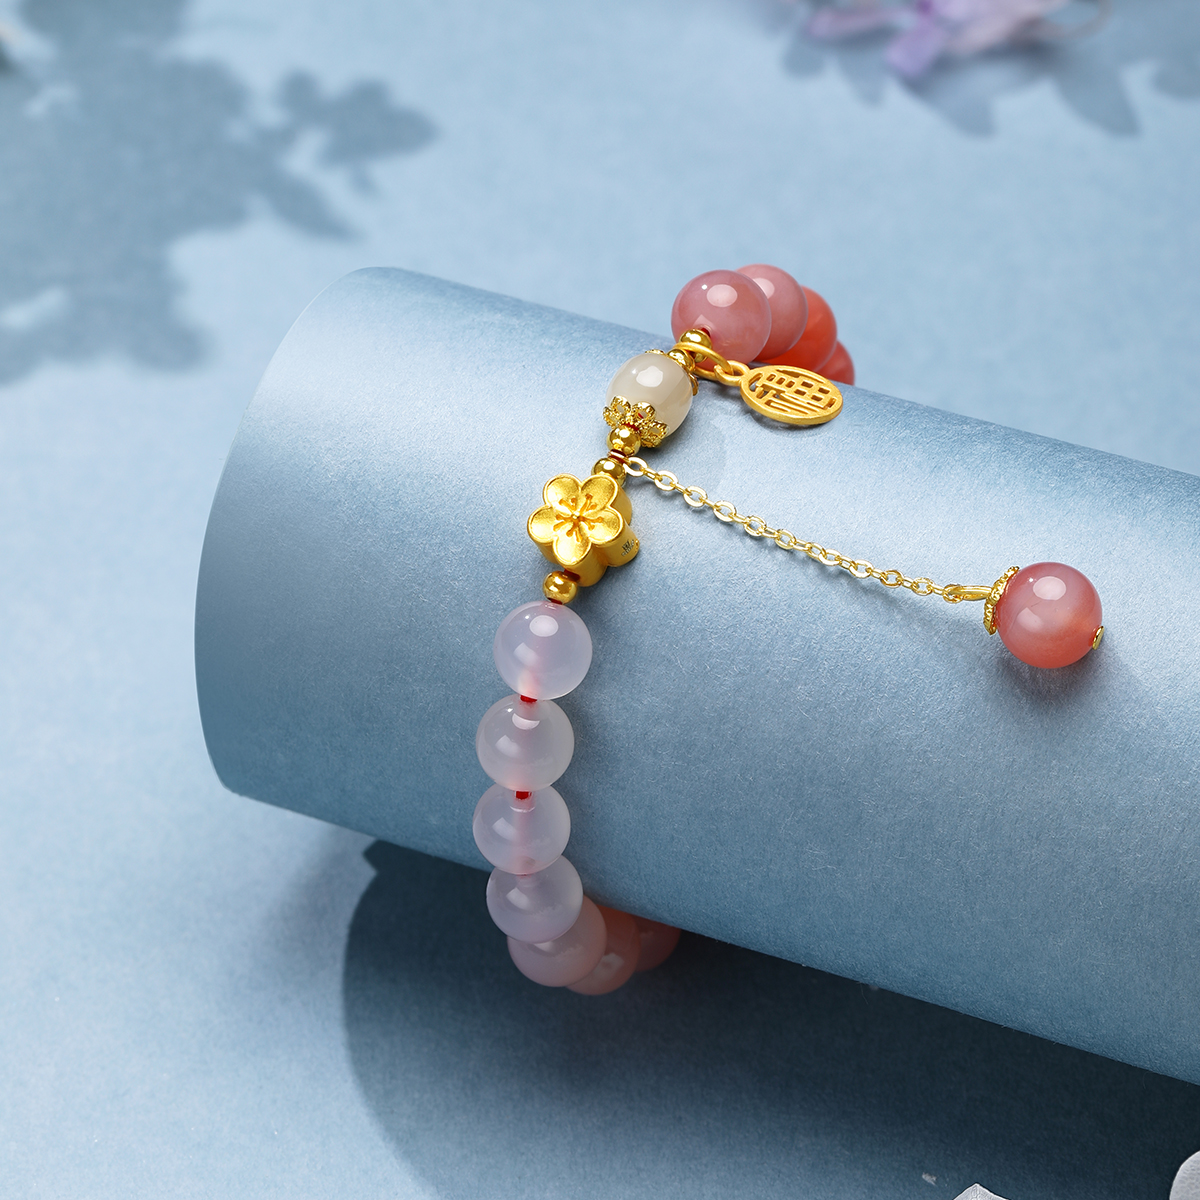 Wine red peach blossom blessing S925 silver bracelet red agate bracelet suitable for daily use